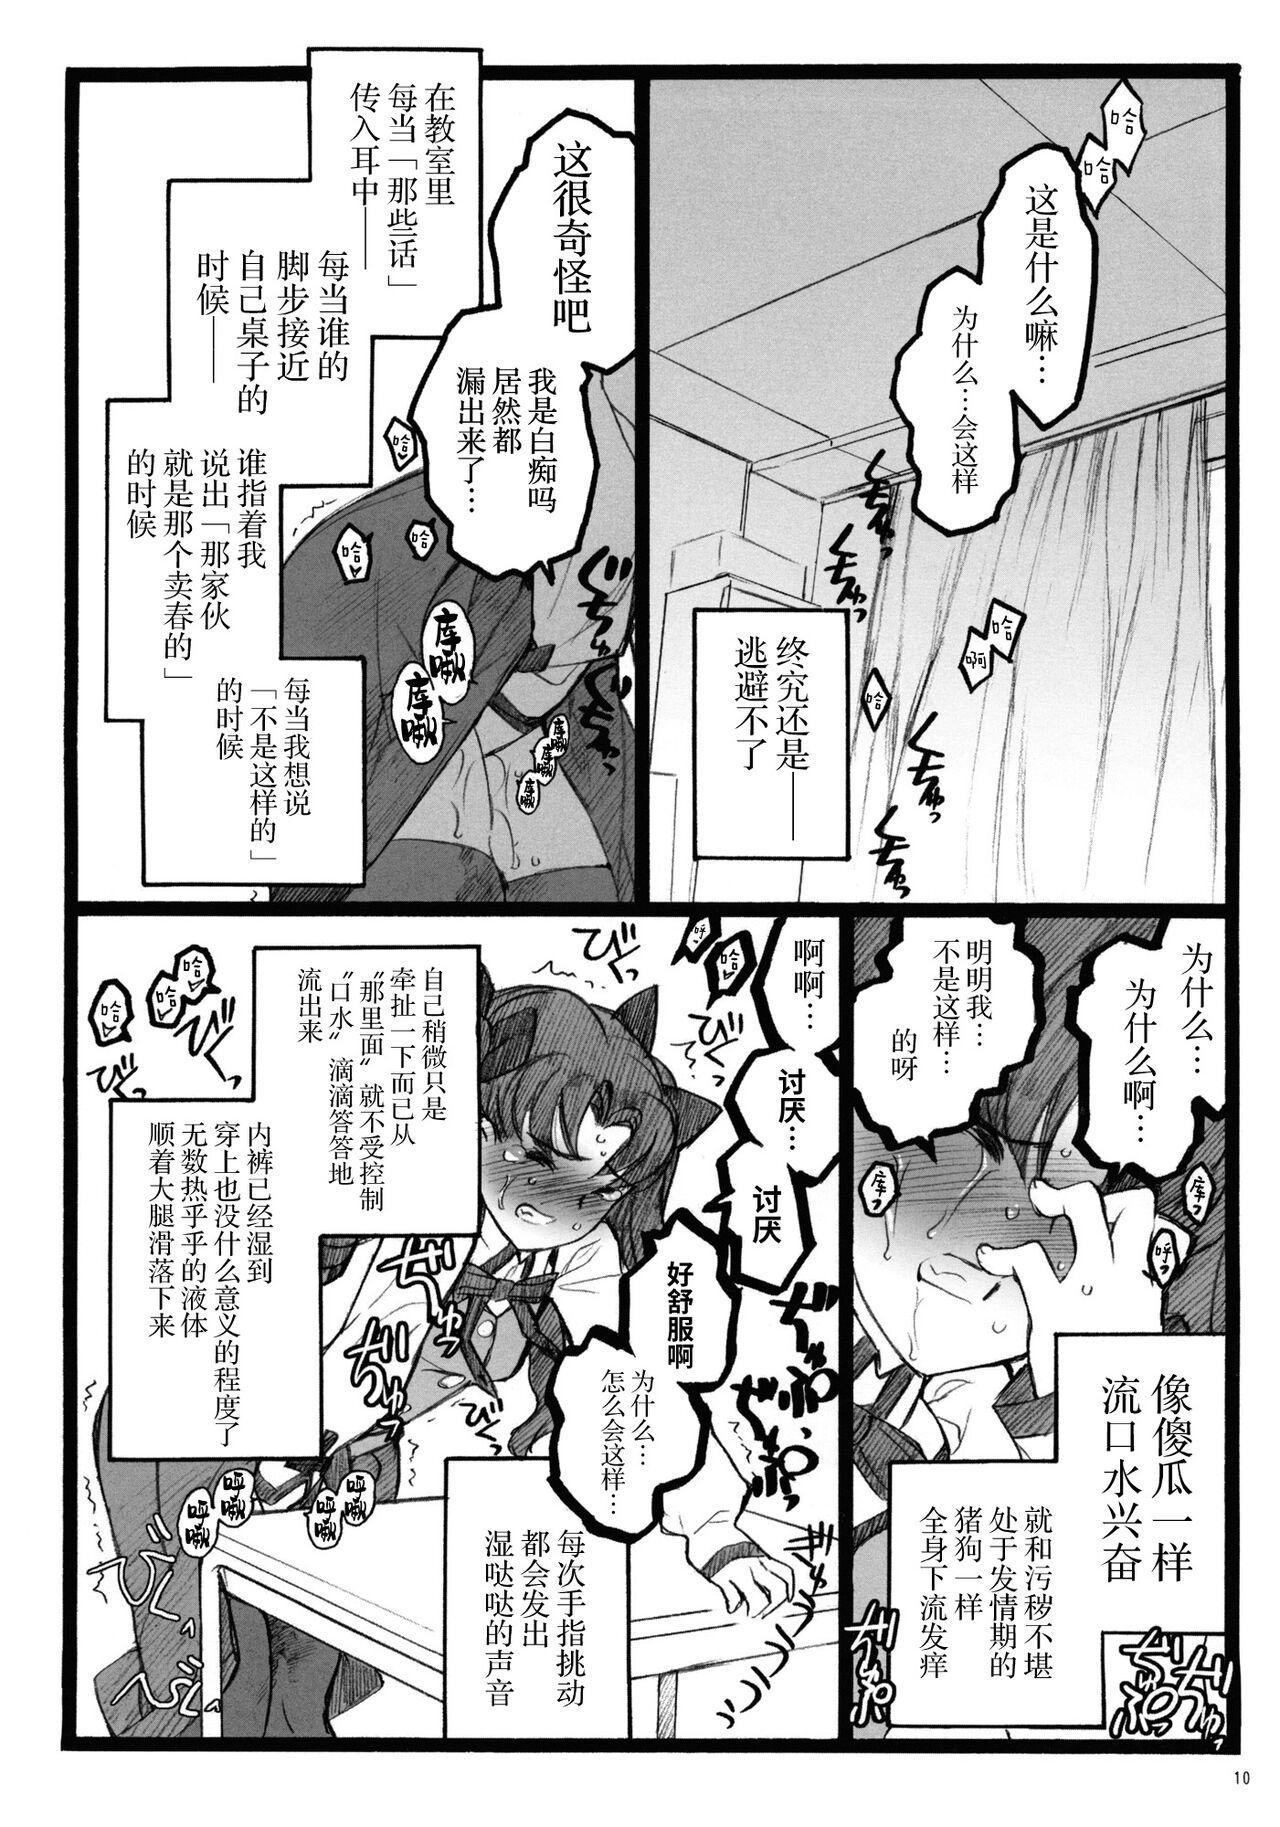 Behind Walpurgisnacht 4 - Fate stay night Raw - Page 9